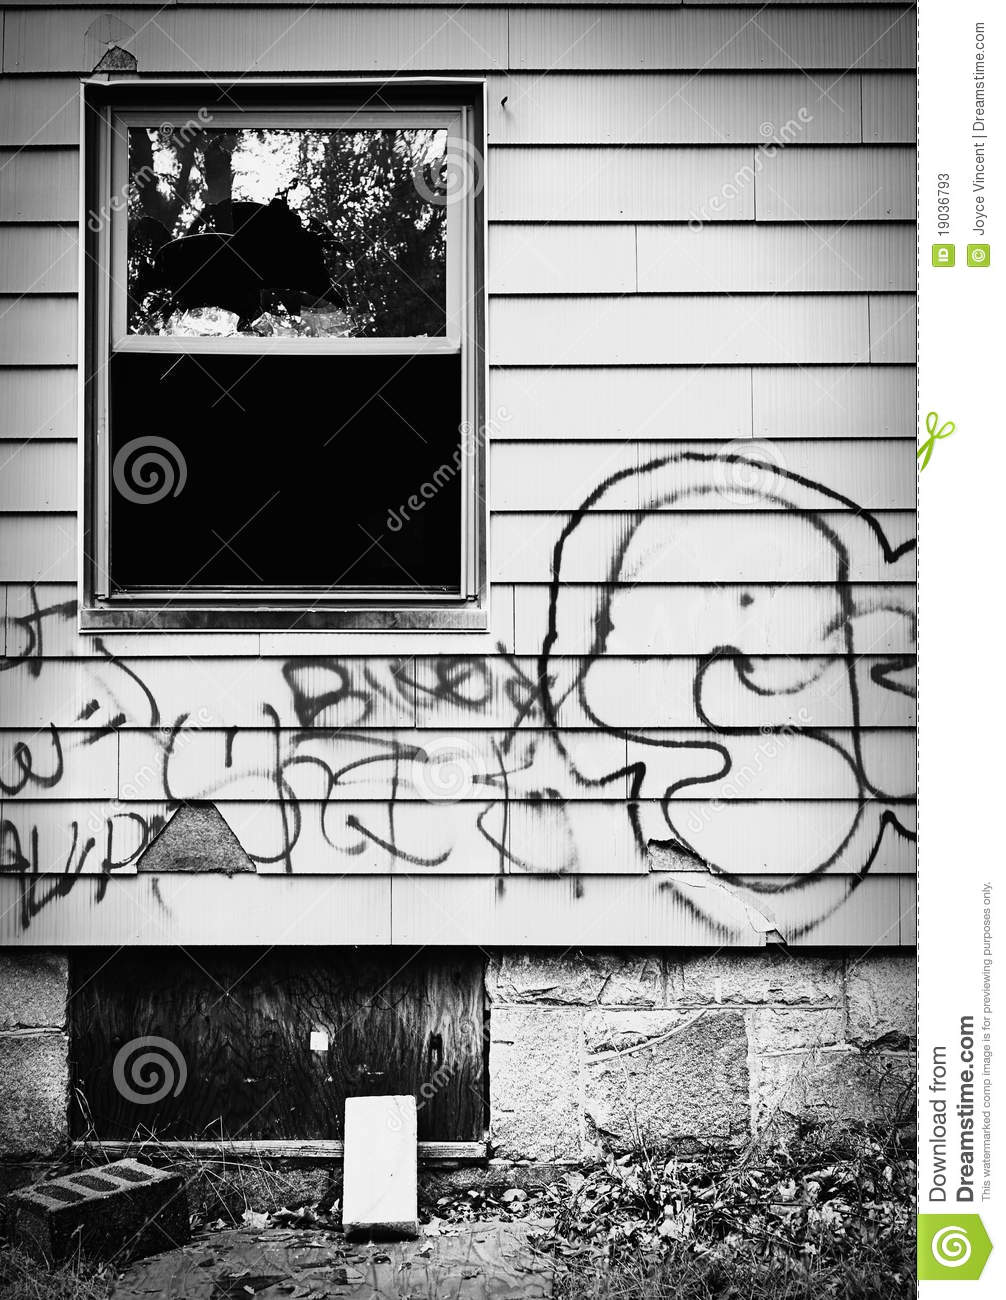 Abandoned House With Broken Window And Graffiti  Stock Photos   Image